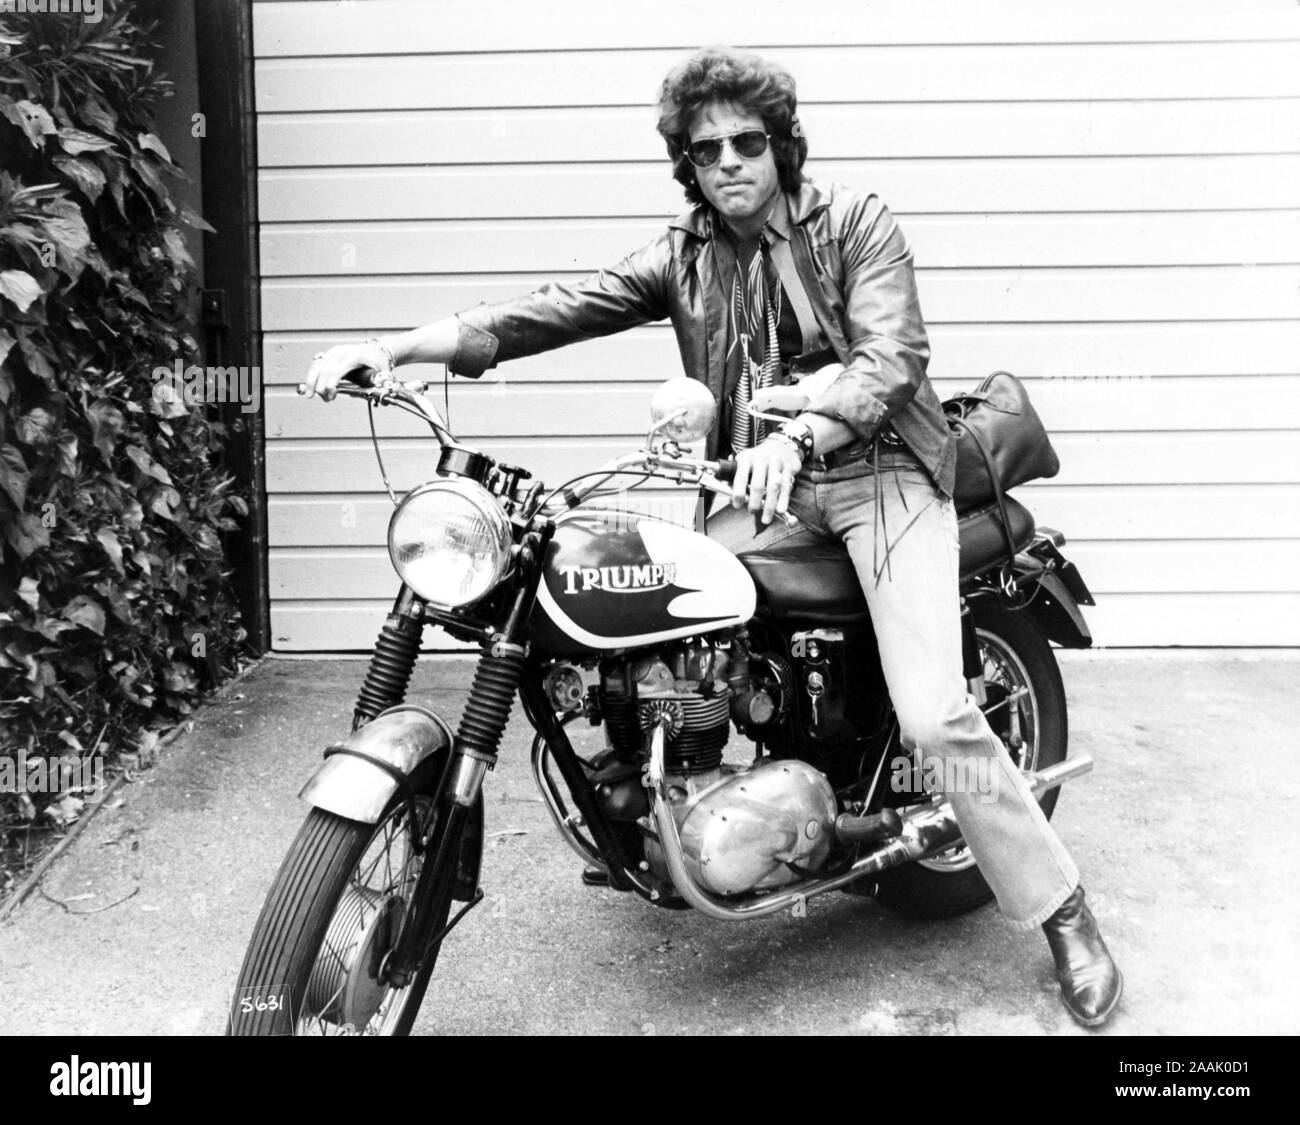 WARREN BEATTY in SHAMPOO (1975), directed by HAL ASHBY. Credit: COLUMBIA  PICTURES / Album Stock Photo - Alamy